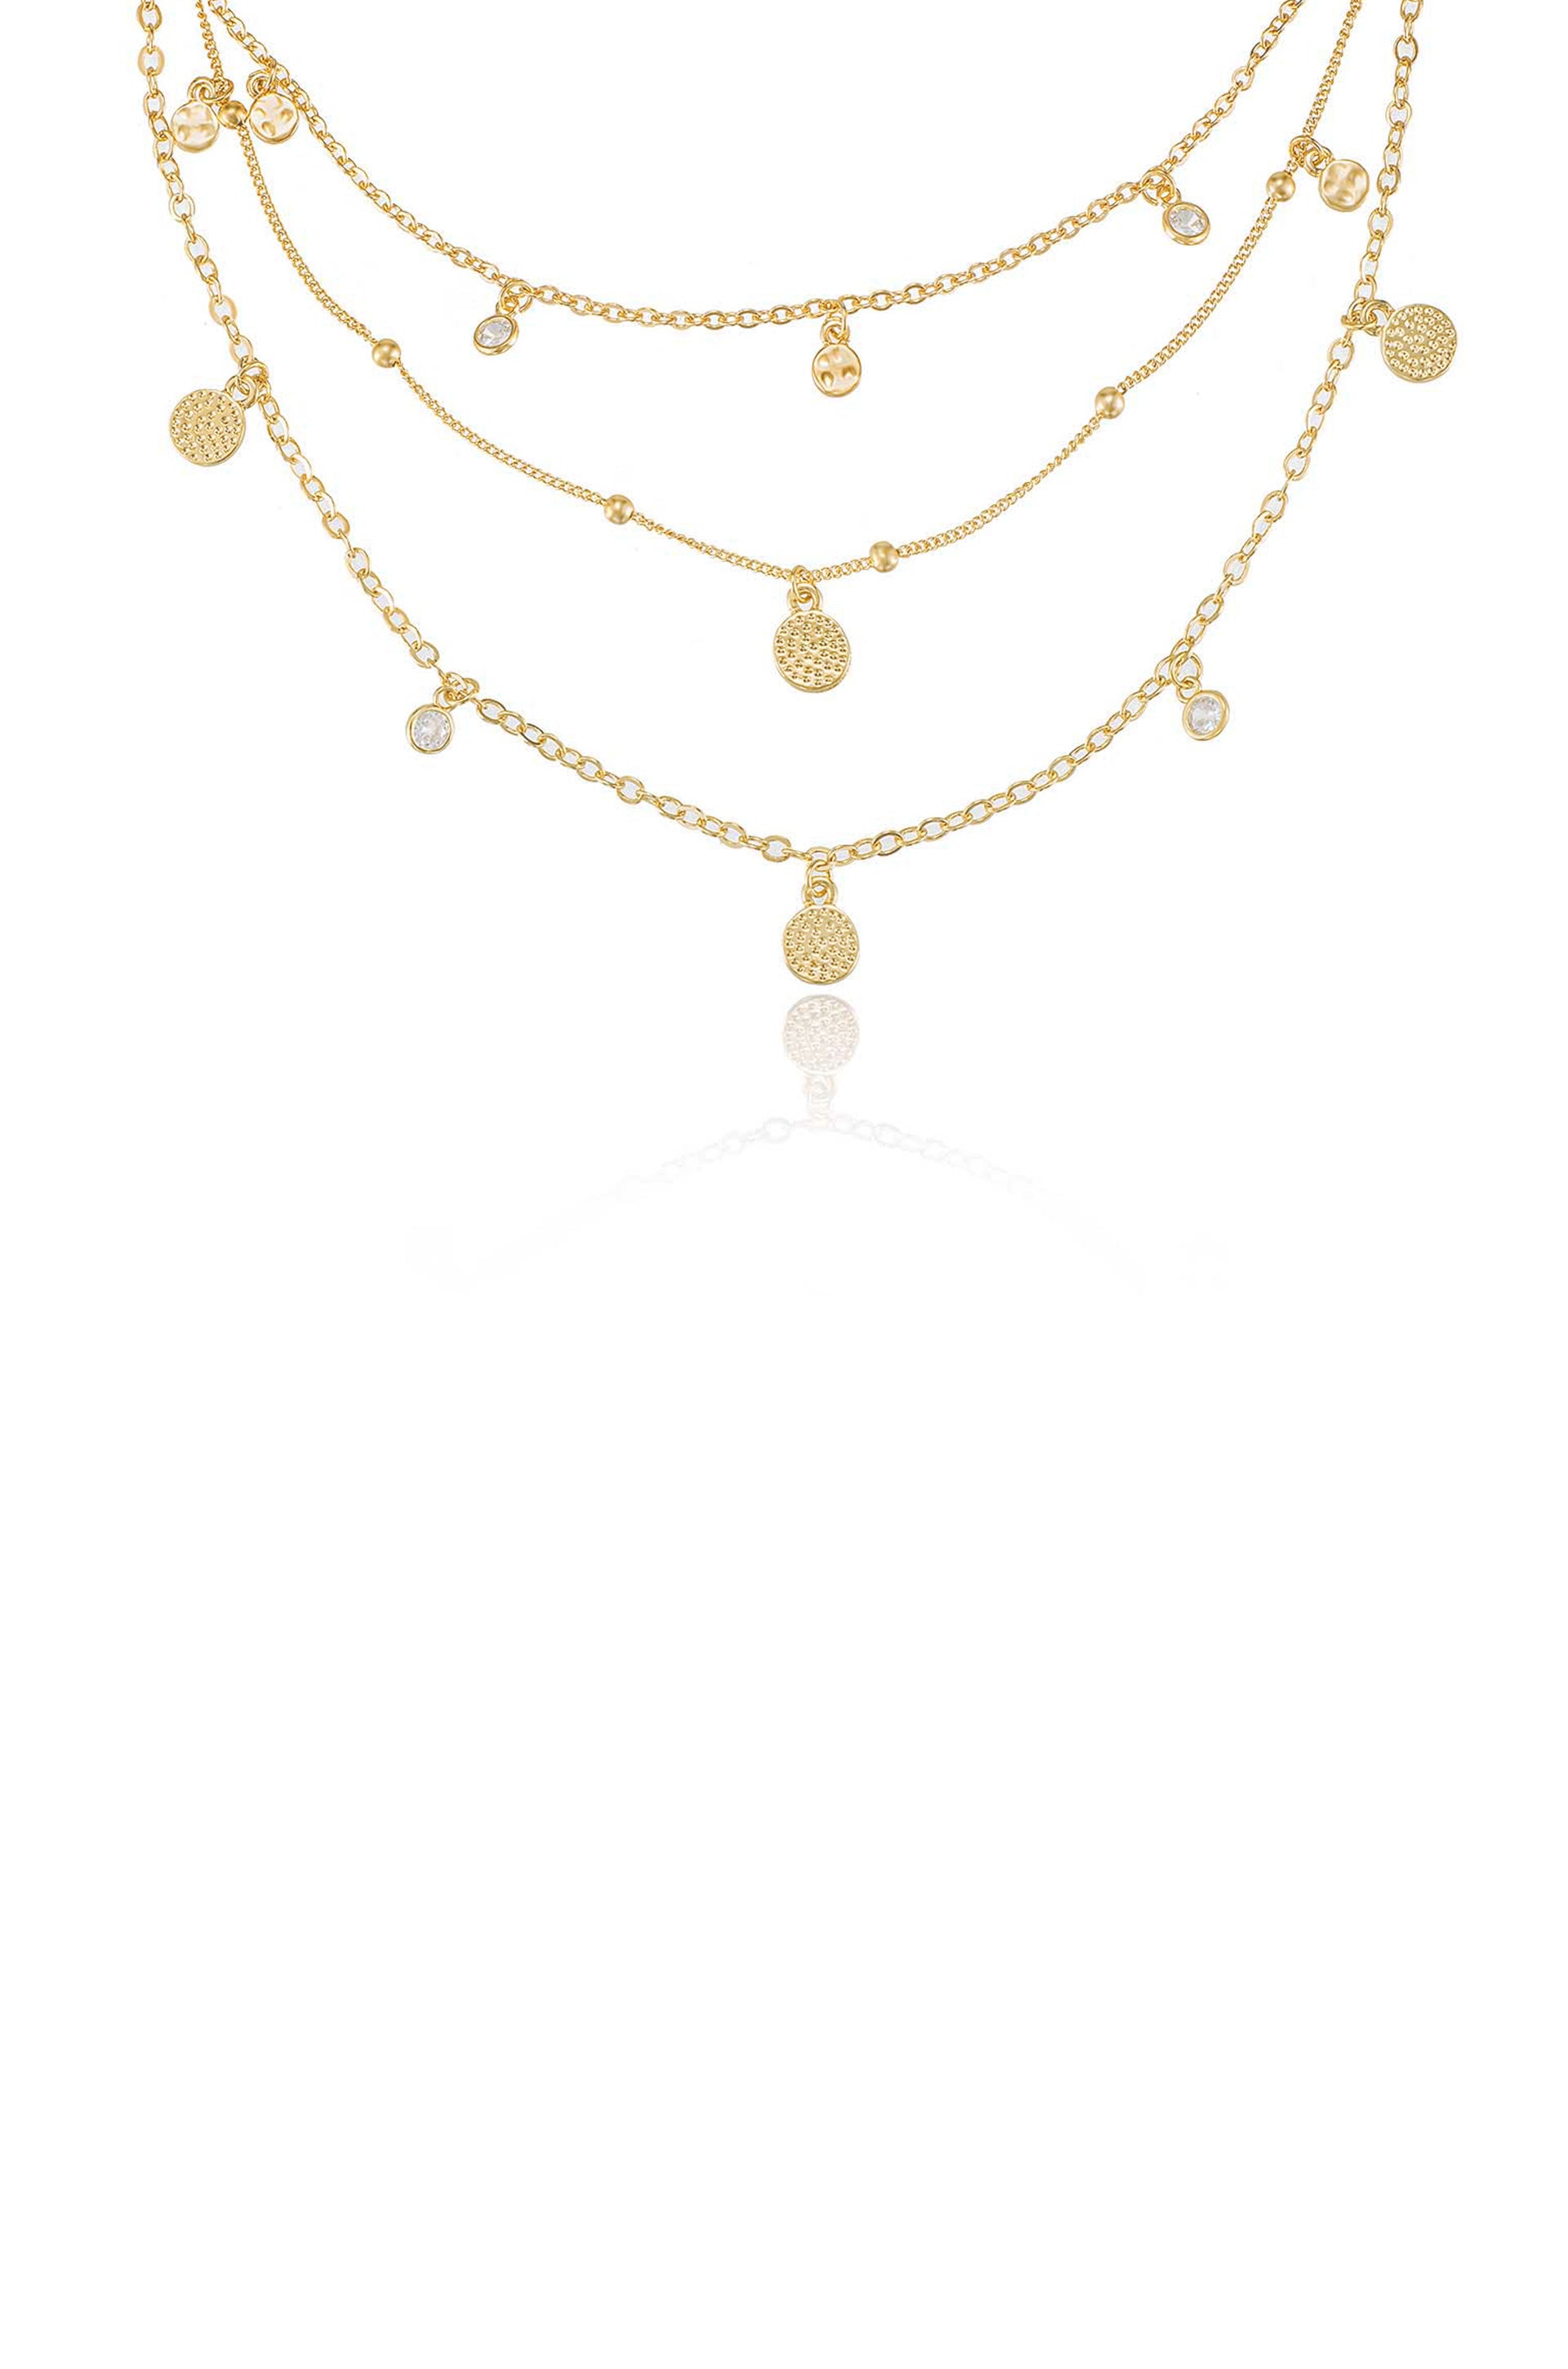 Gold Triple Layer Necklace, Delicate Necklaces, Gold Filled